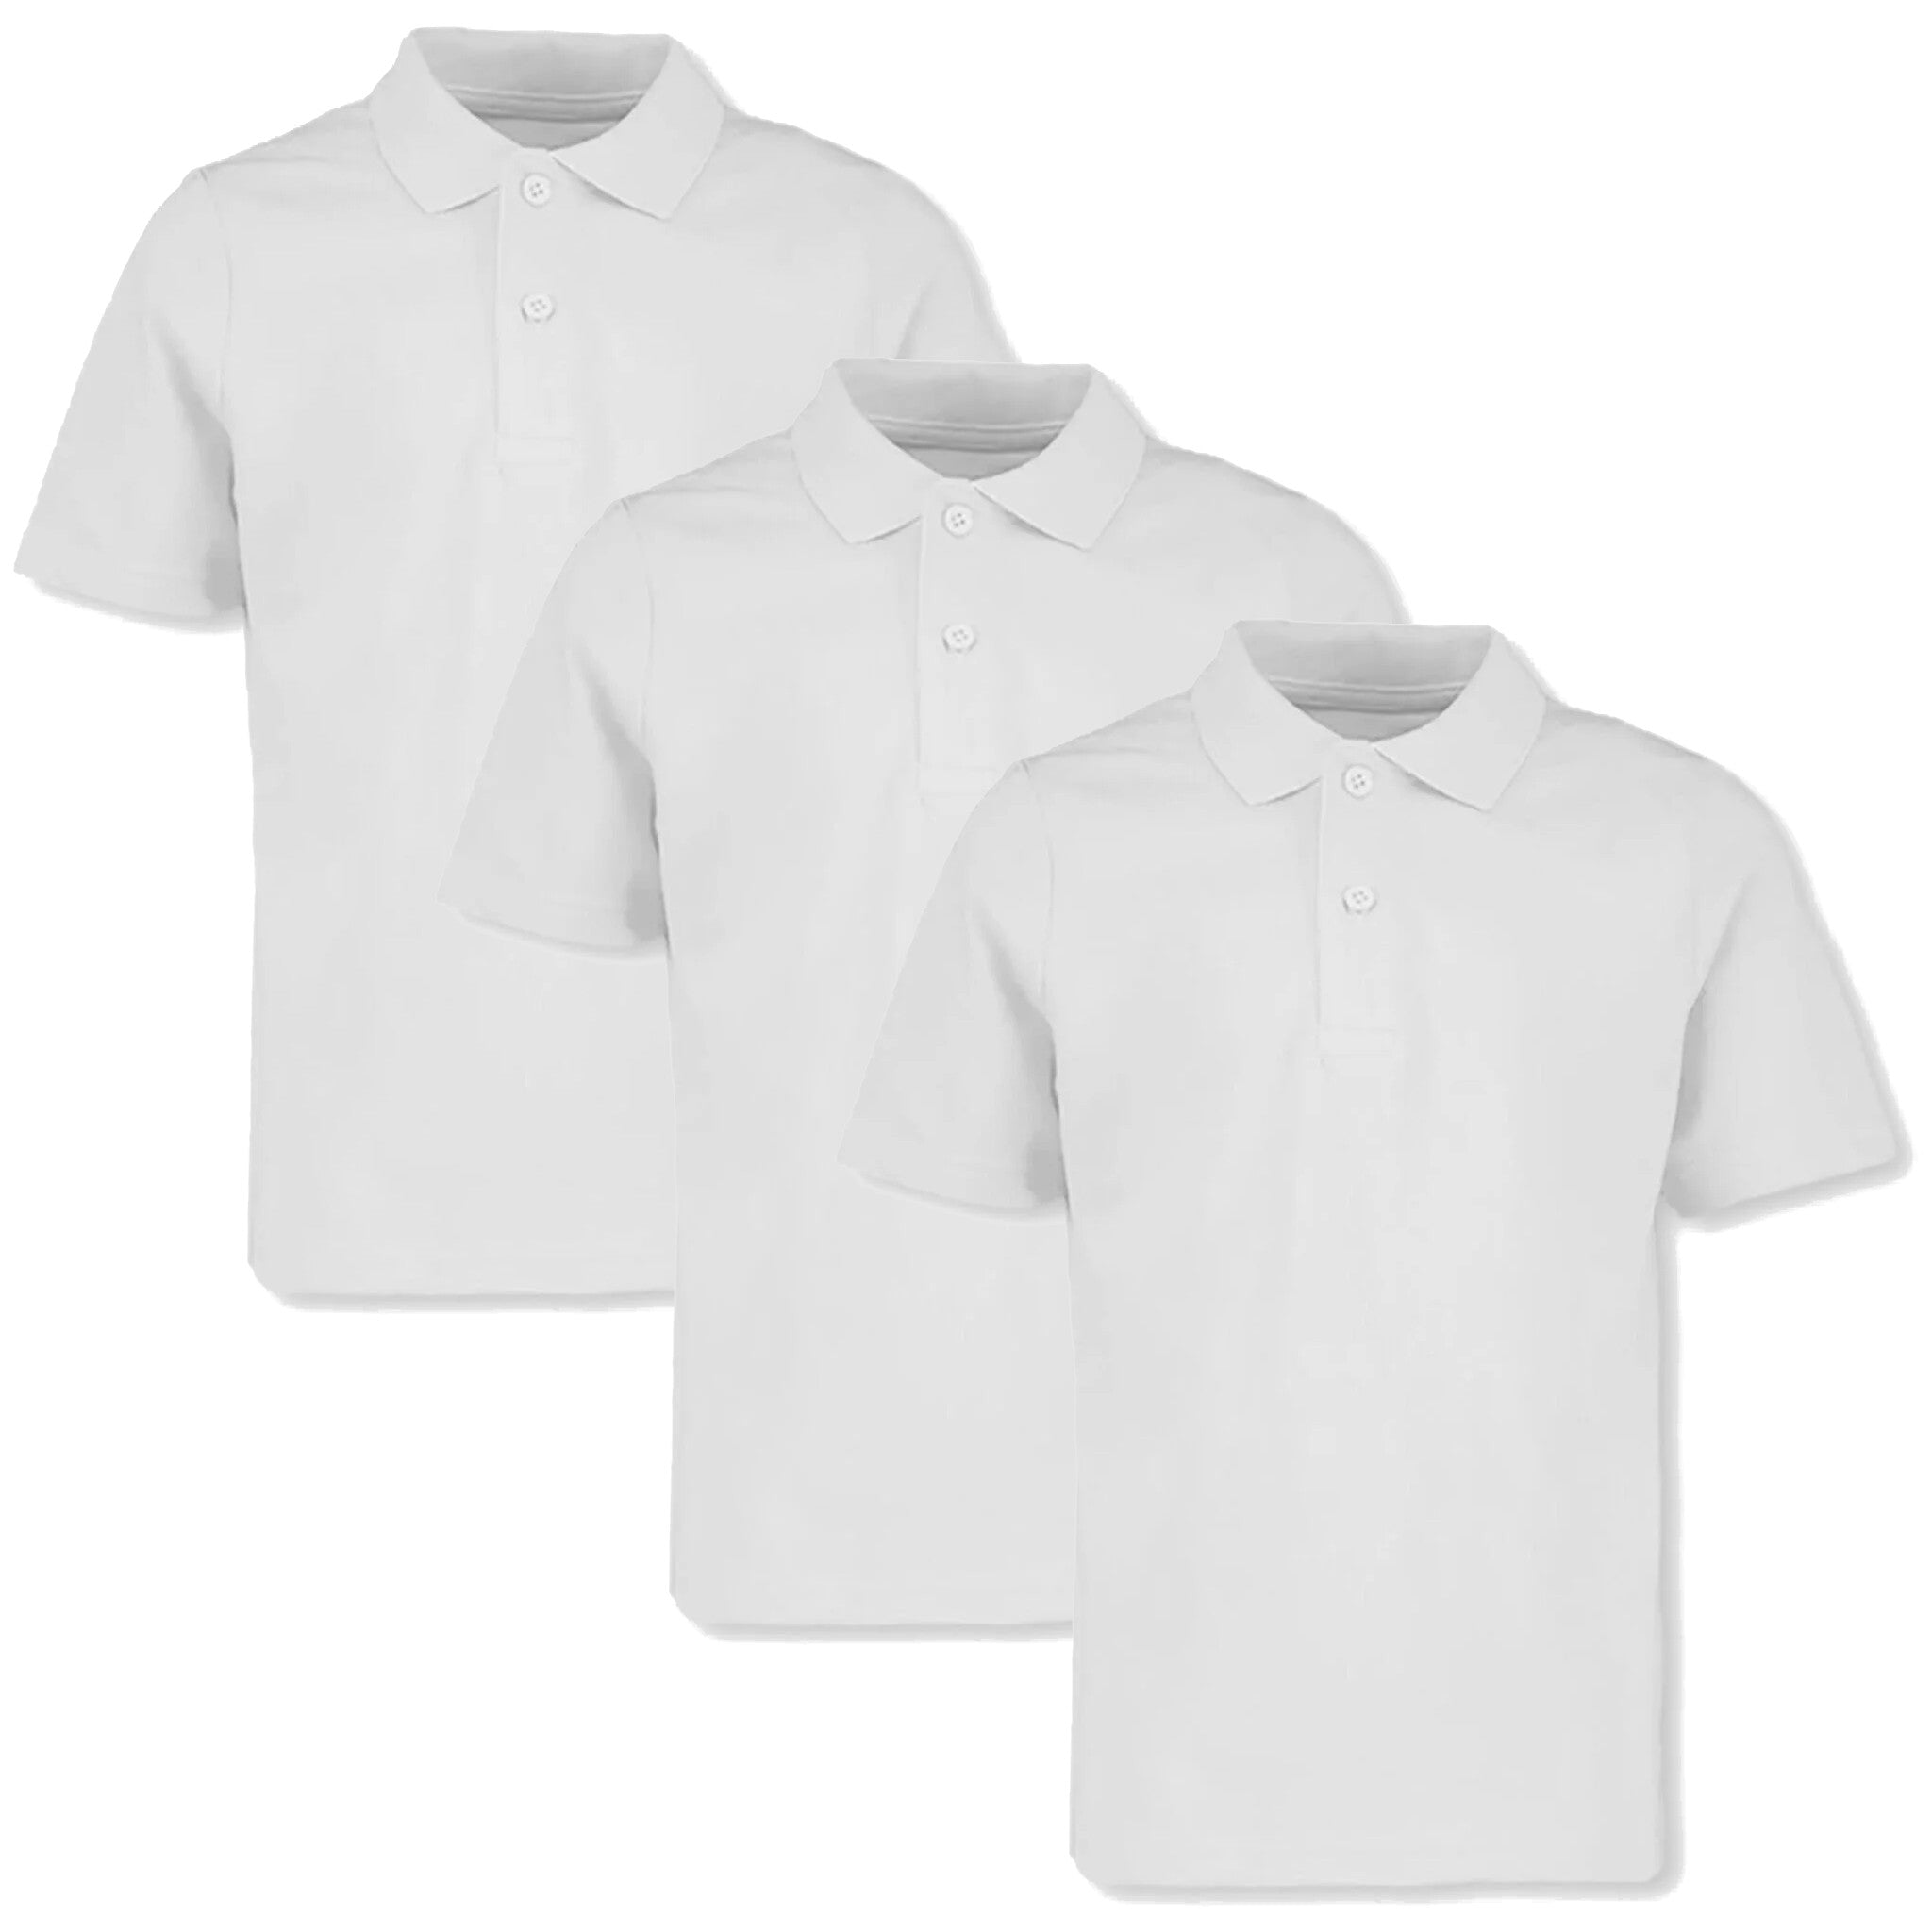 3 Pack Boys Pure Cotton School Polo Shirts White (3-16 Years)